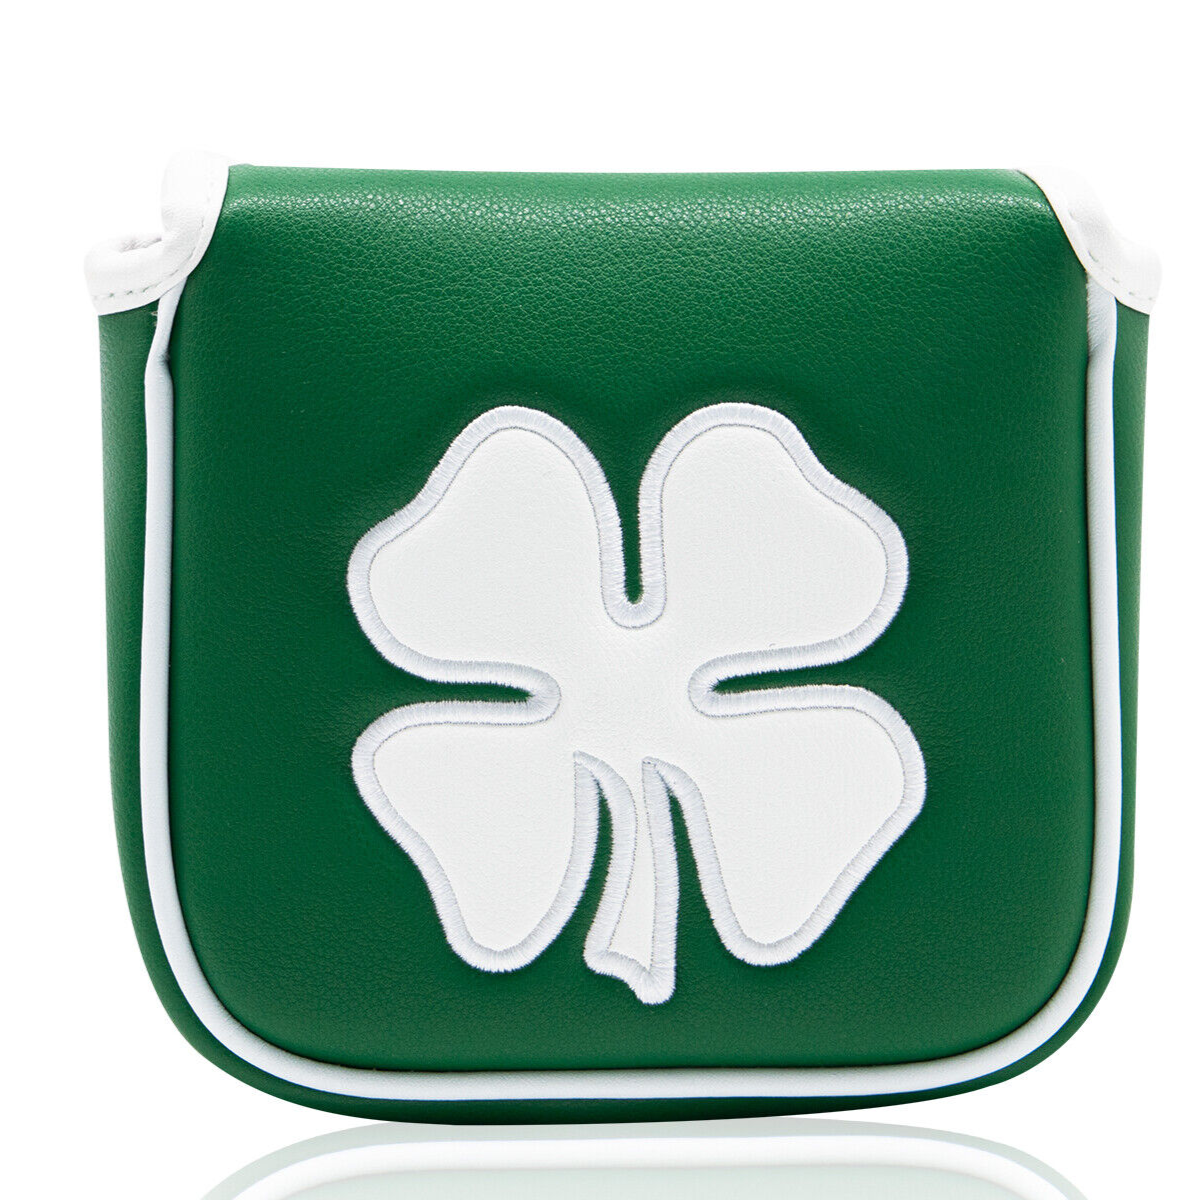 GolfBasic Lucky Square Mallet Putter Cover